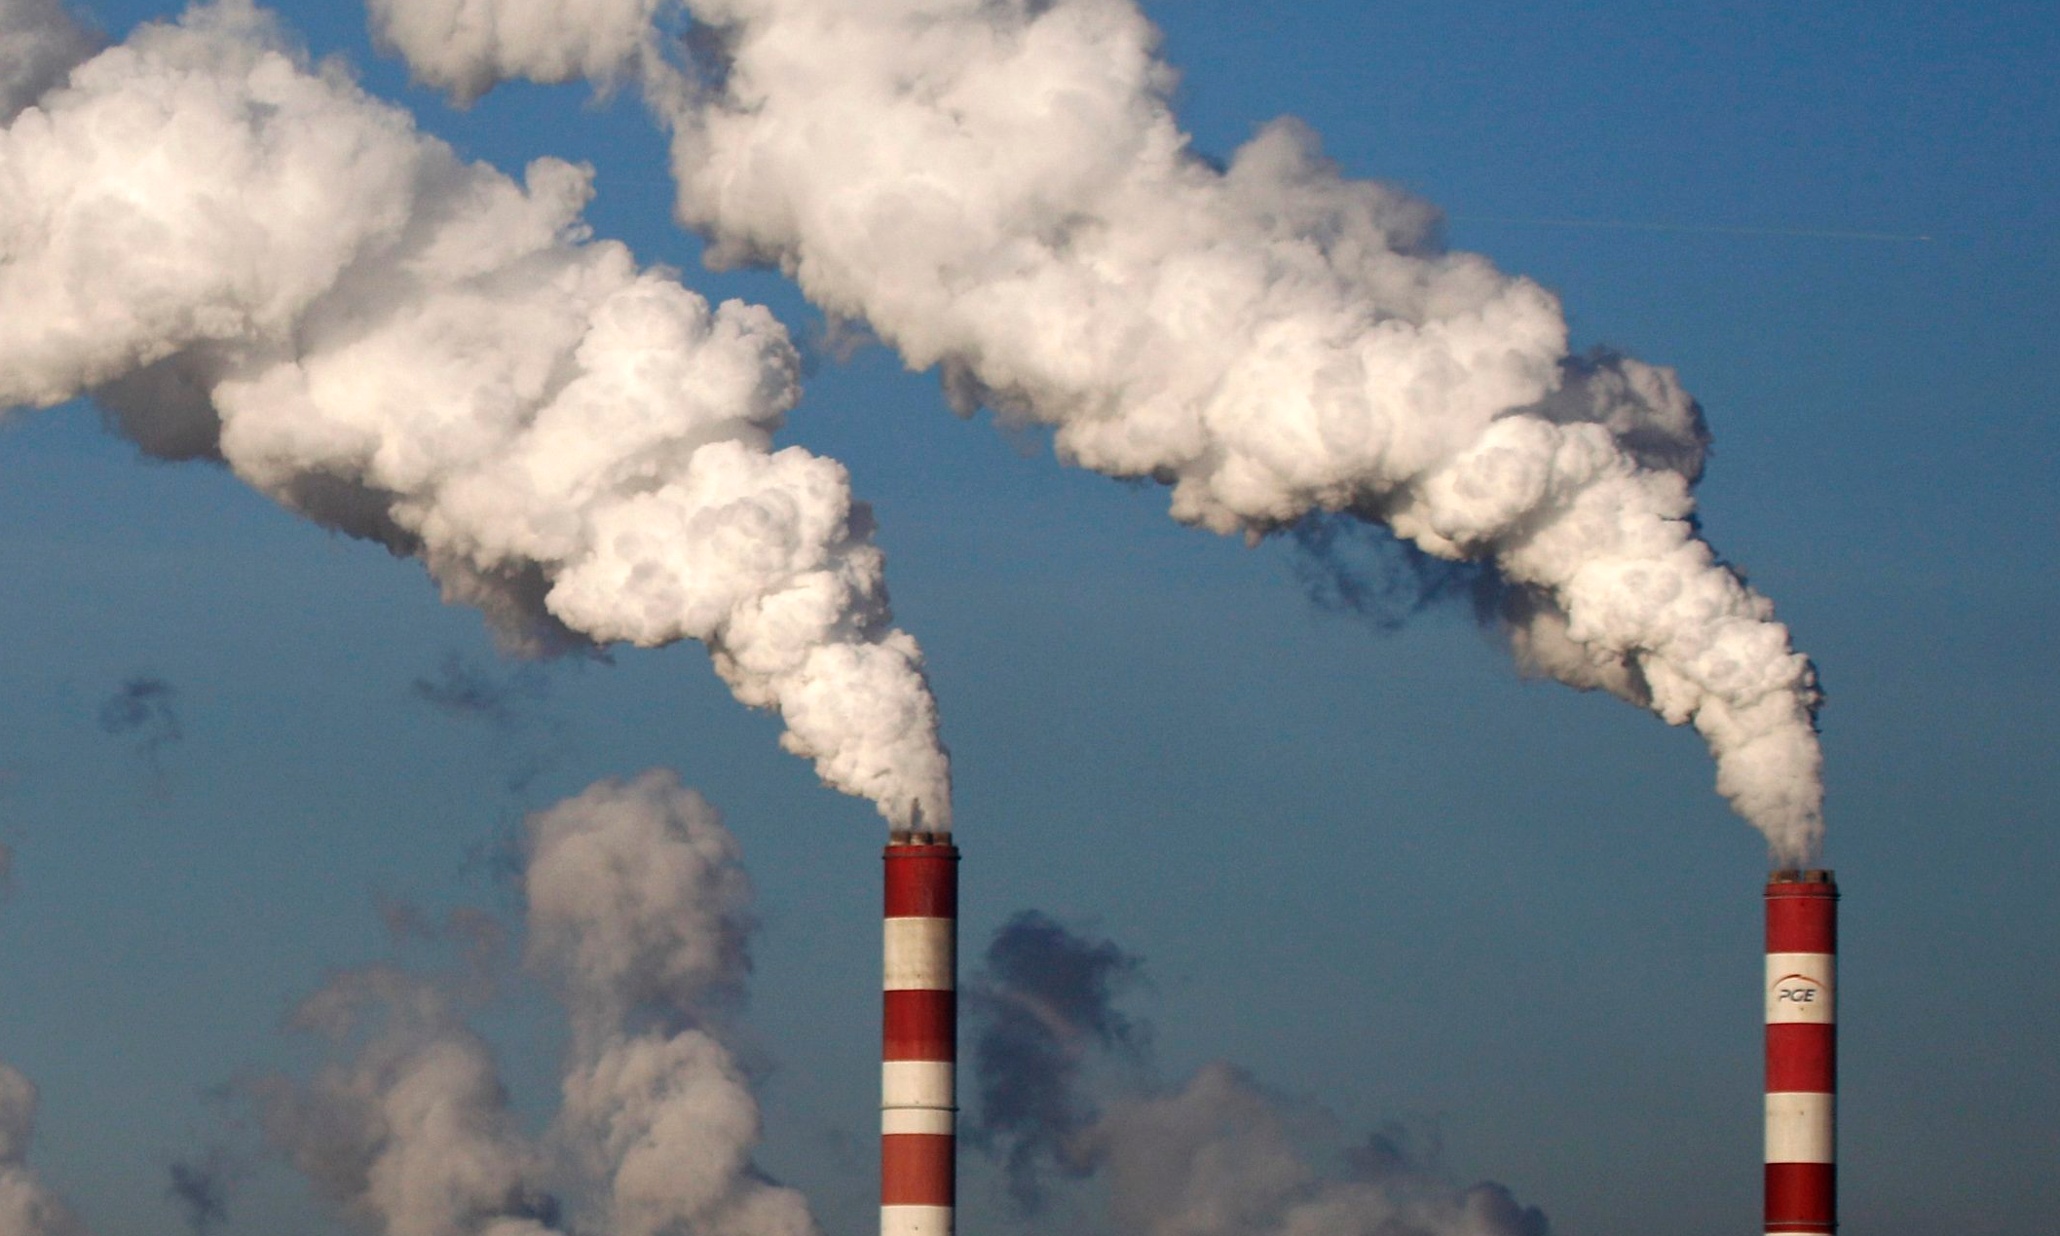 Eu Leaders Agree To Cut Greenhouse Gas Emissions By 40 By 2030